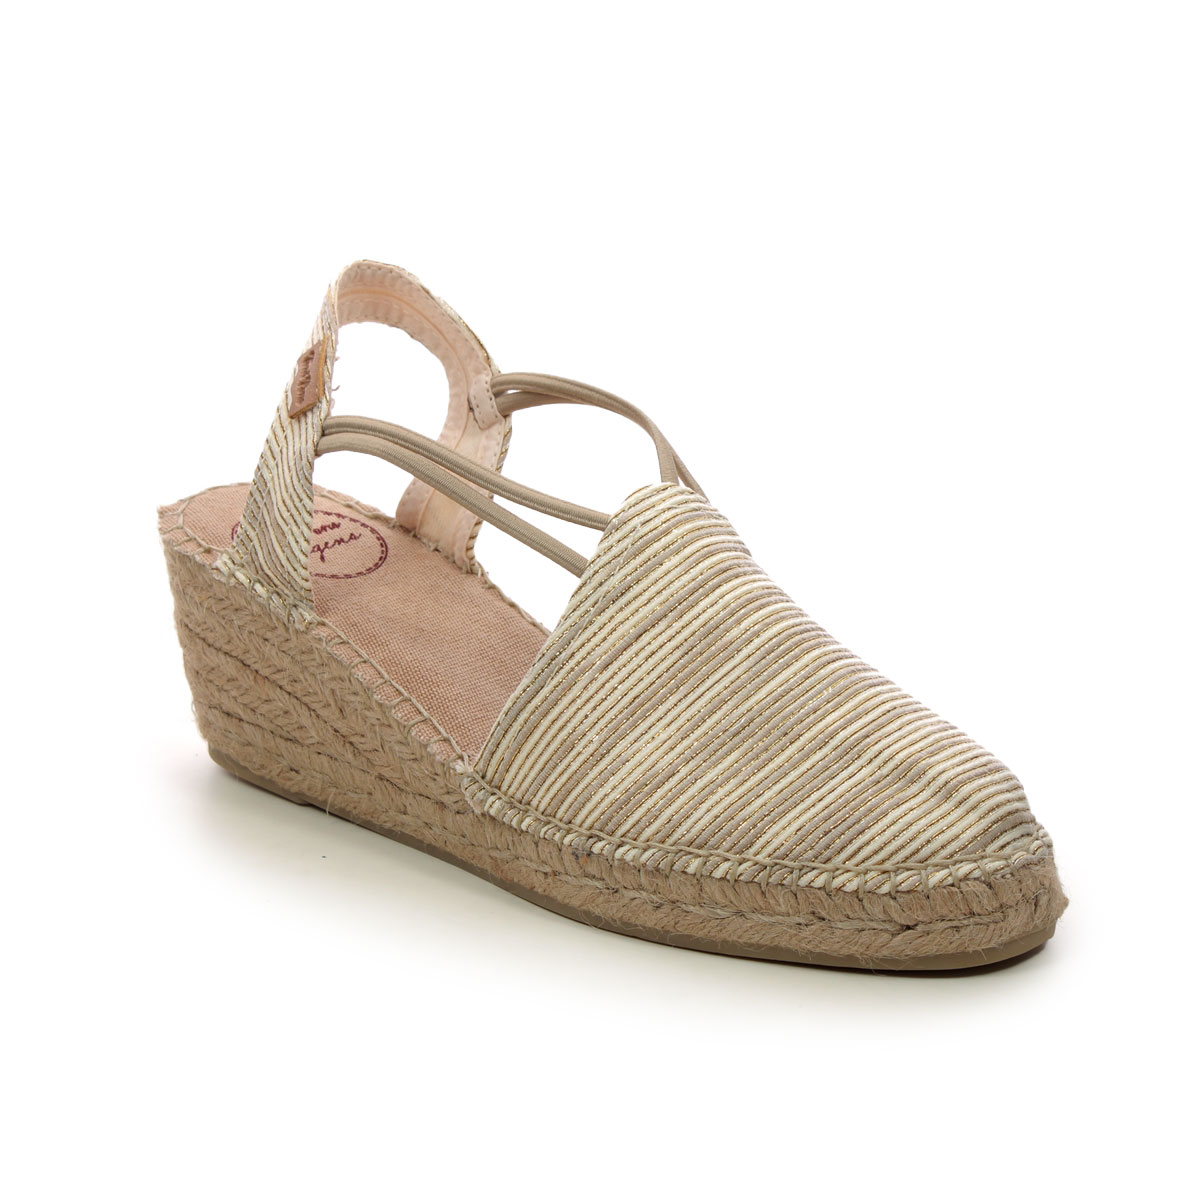 Toni Pons Tania Zr 4 Beige Womens Espadrilles 4005-55 in a Plain Textile in Size 38